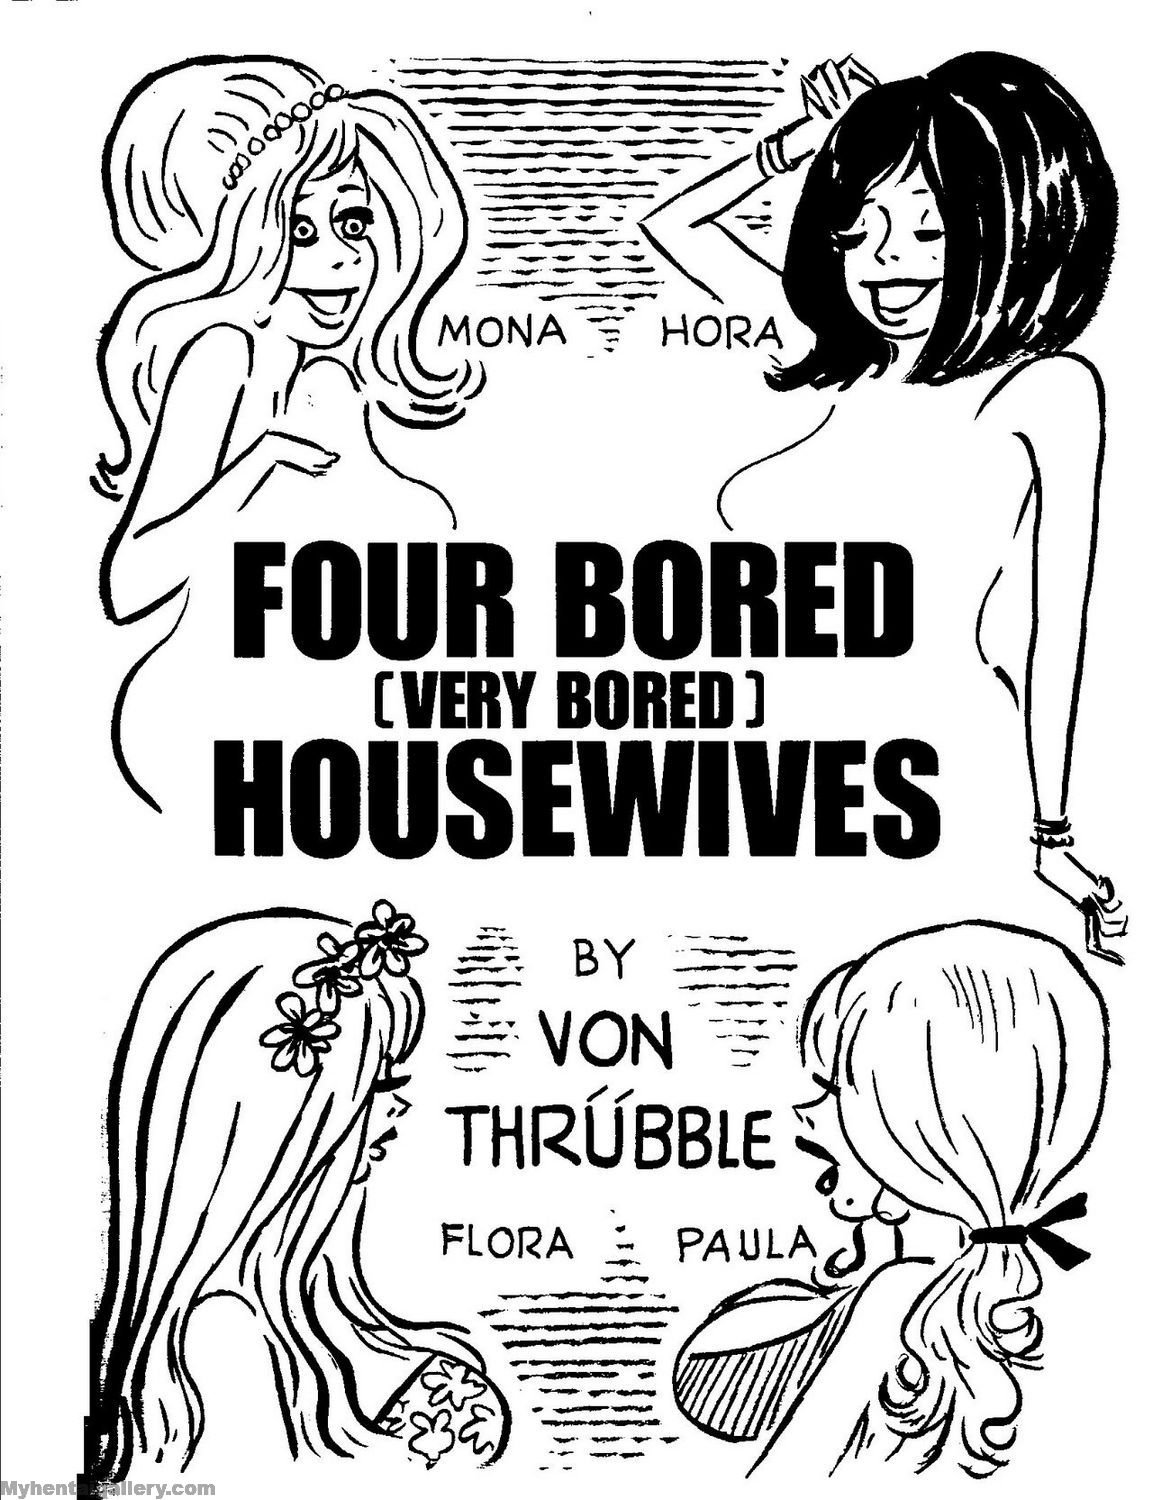 Four Very Bored Housewives 9 - Mona - Buzzed Off